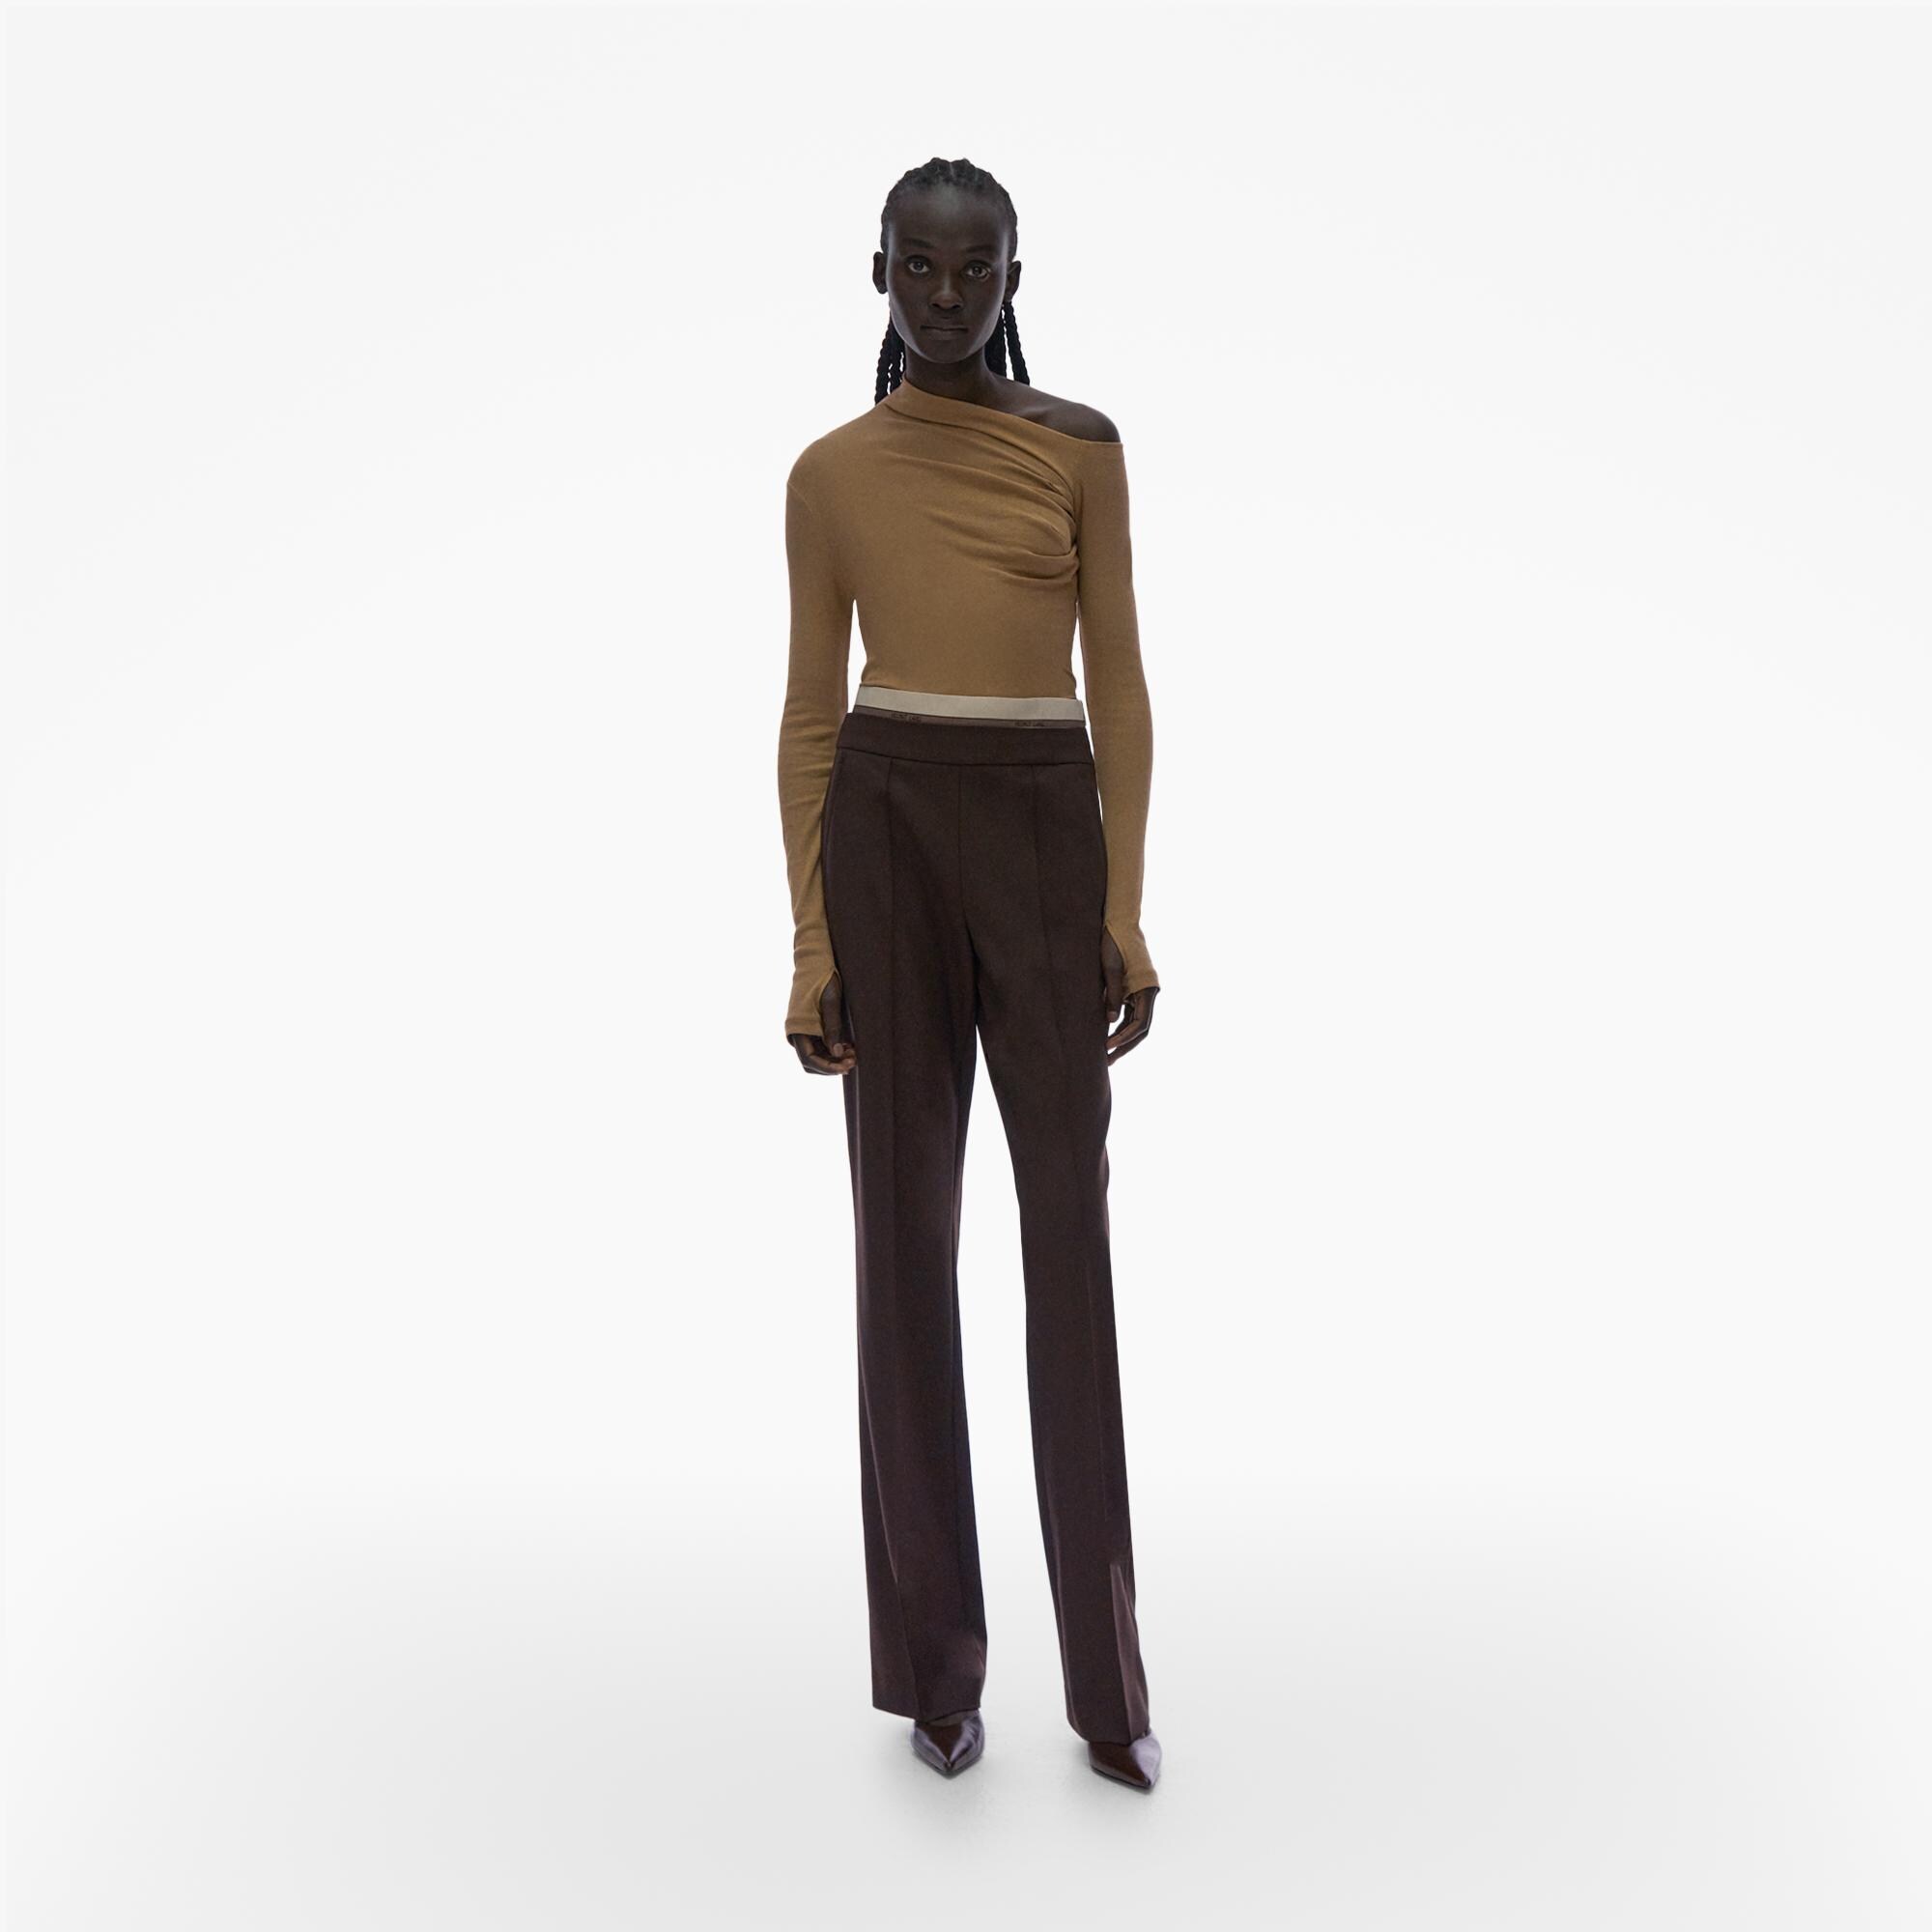 Modest and Lasting – Helmut Lang